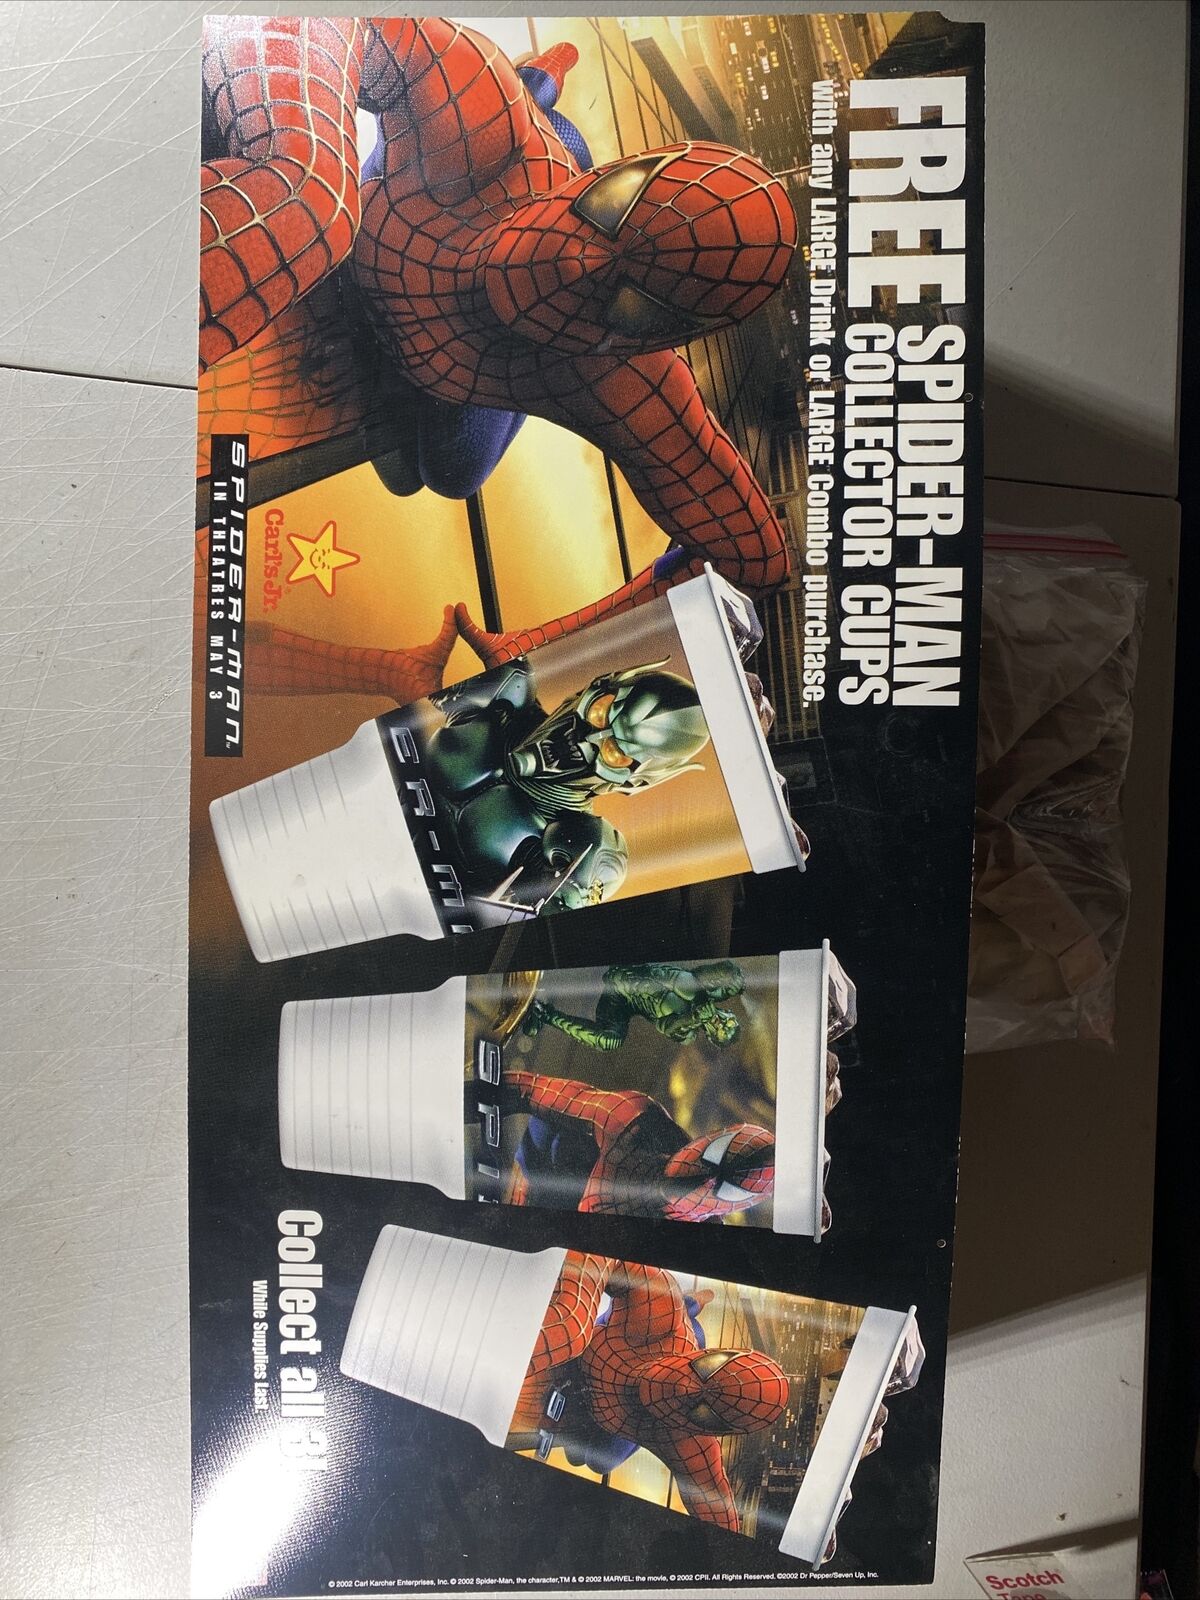 2002 Carl’s Jr. | Spider-Man | In Store Hanging Advertisement Signage | 12”x25”